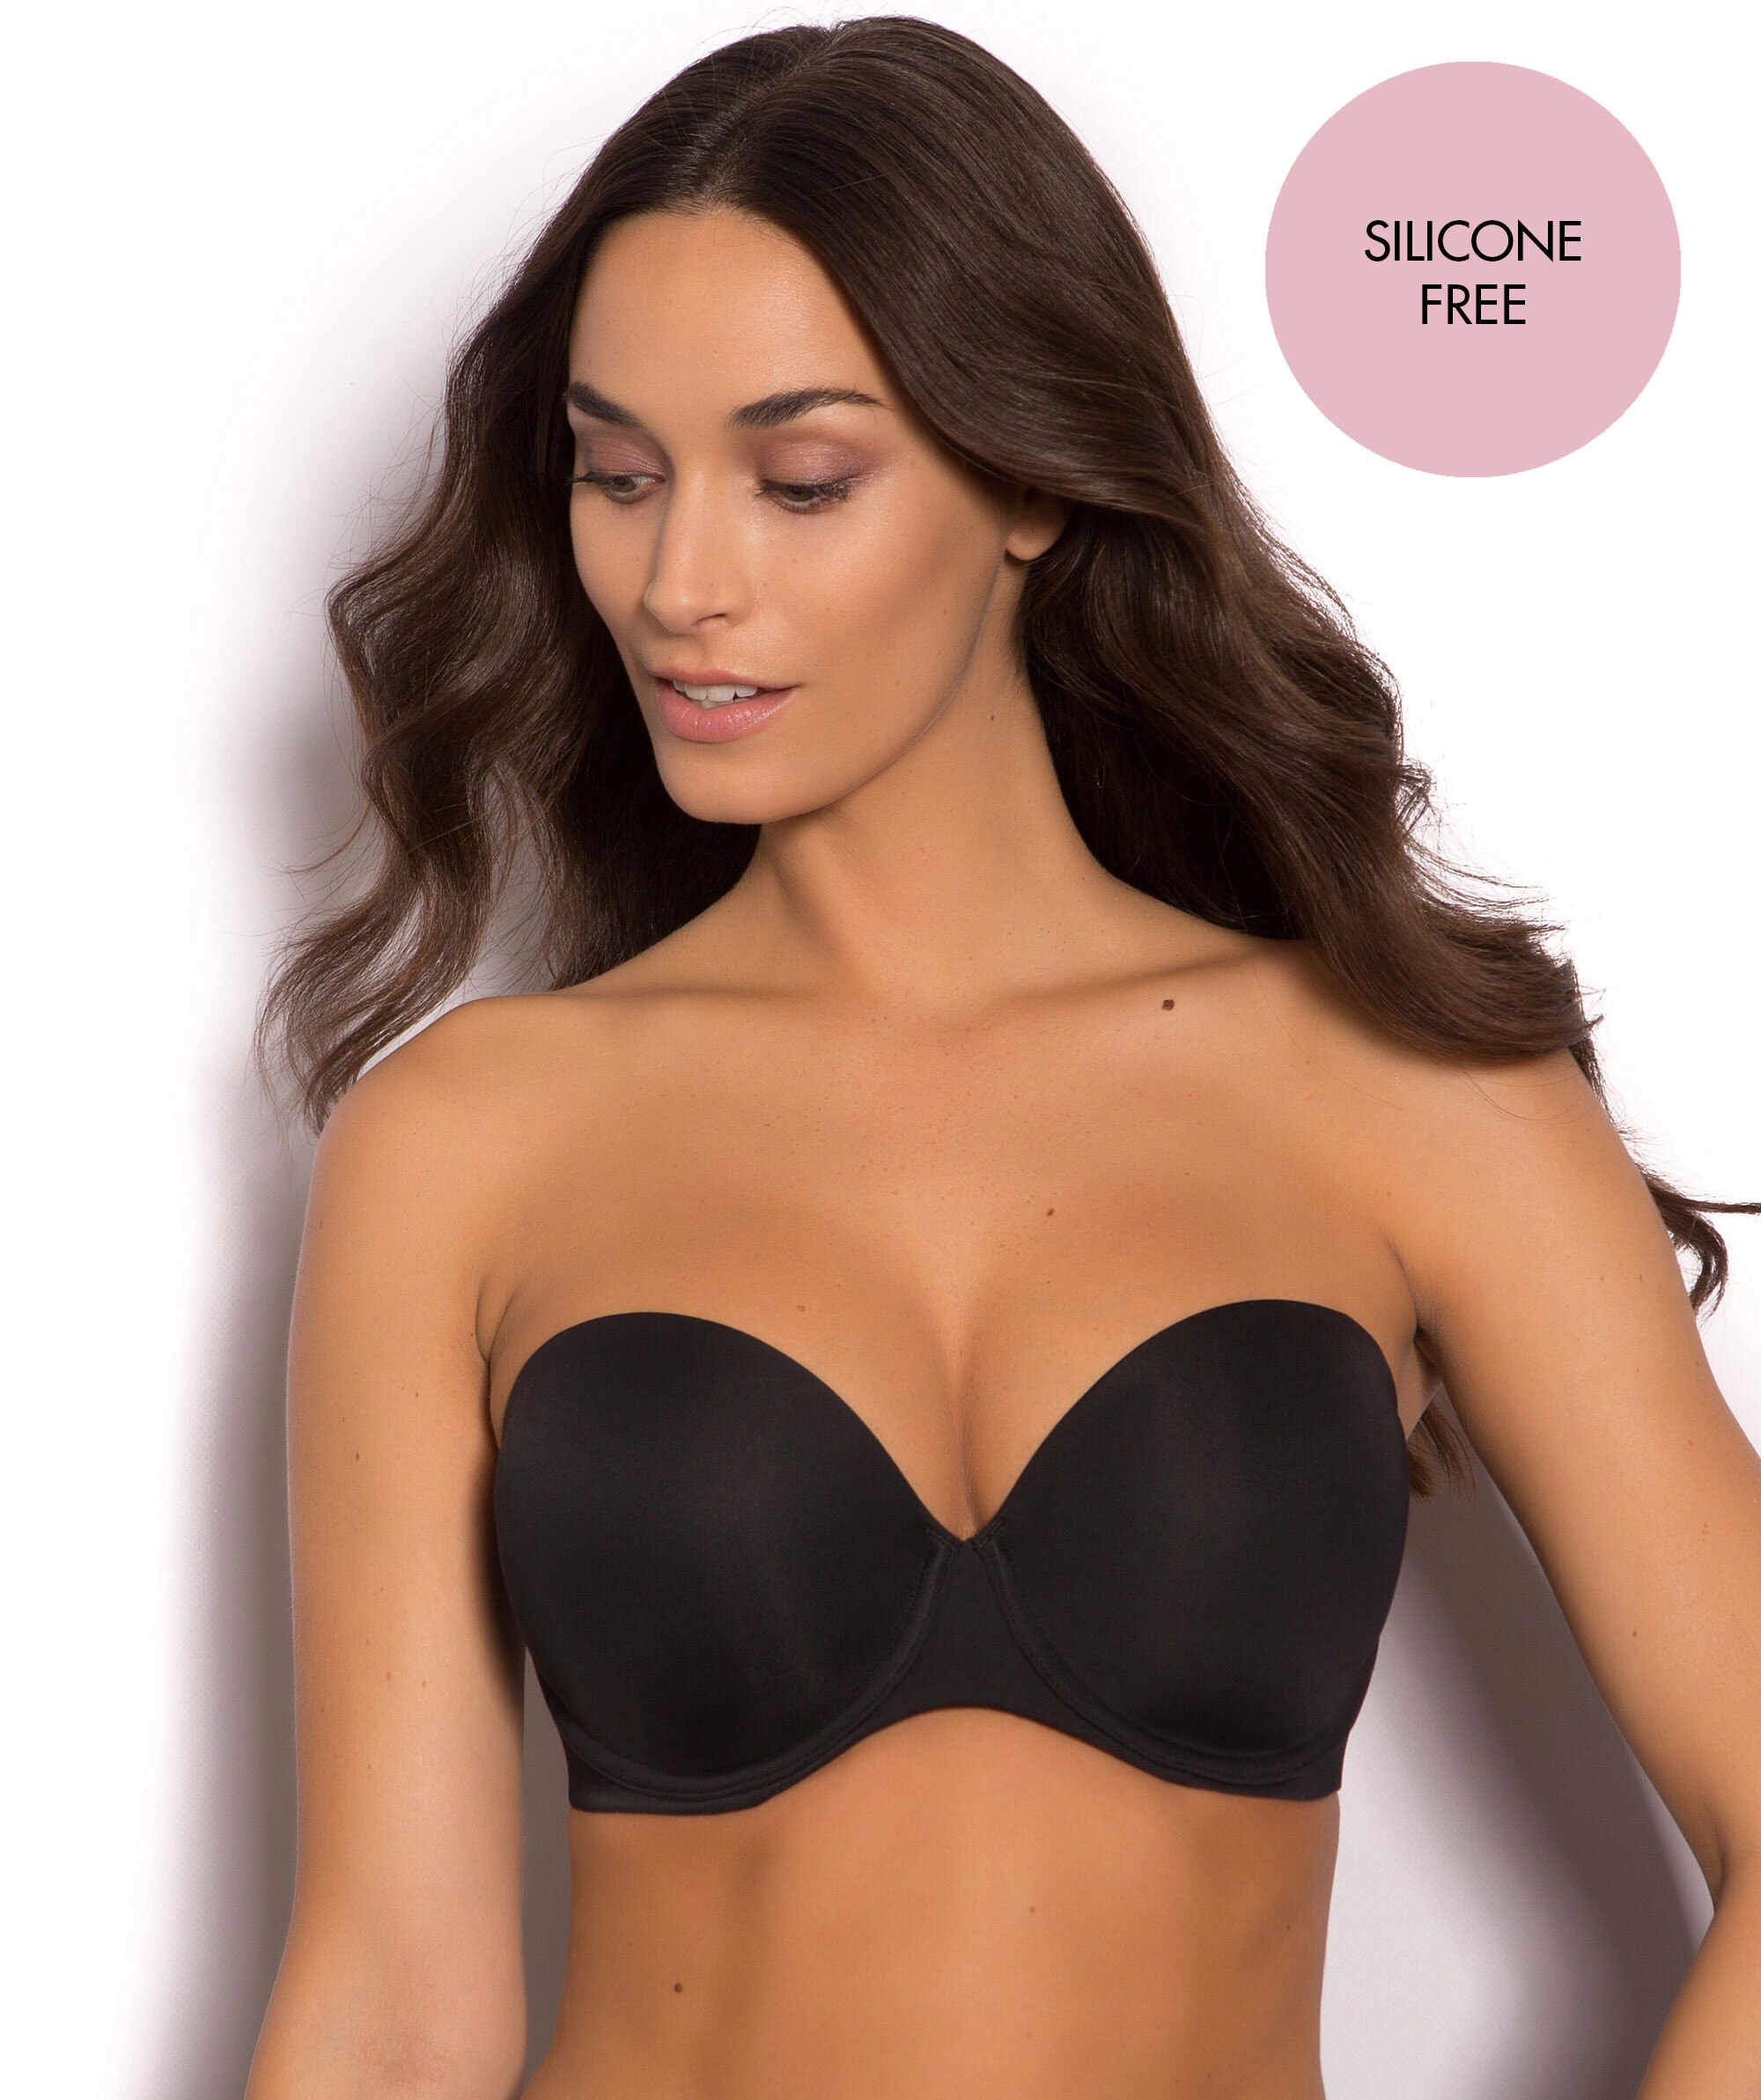 Nine To Five Silicone Free Full Cup Strapless Bra - Black